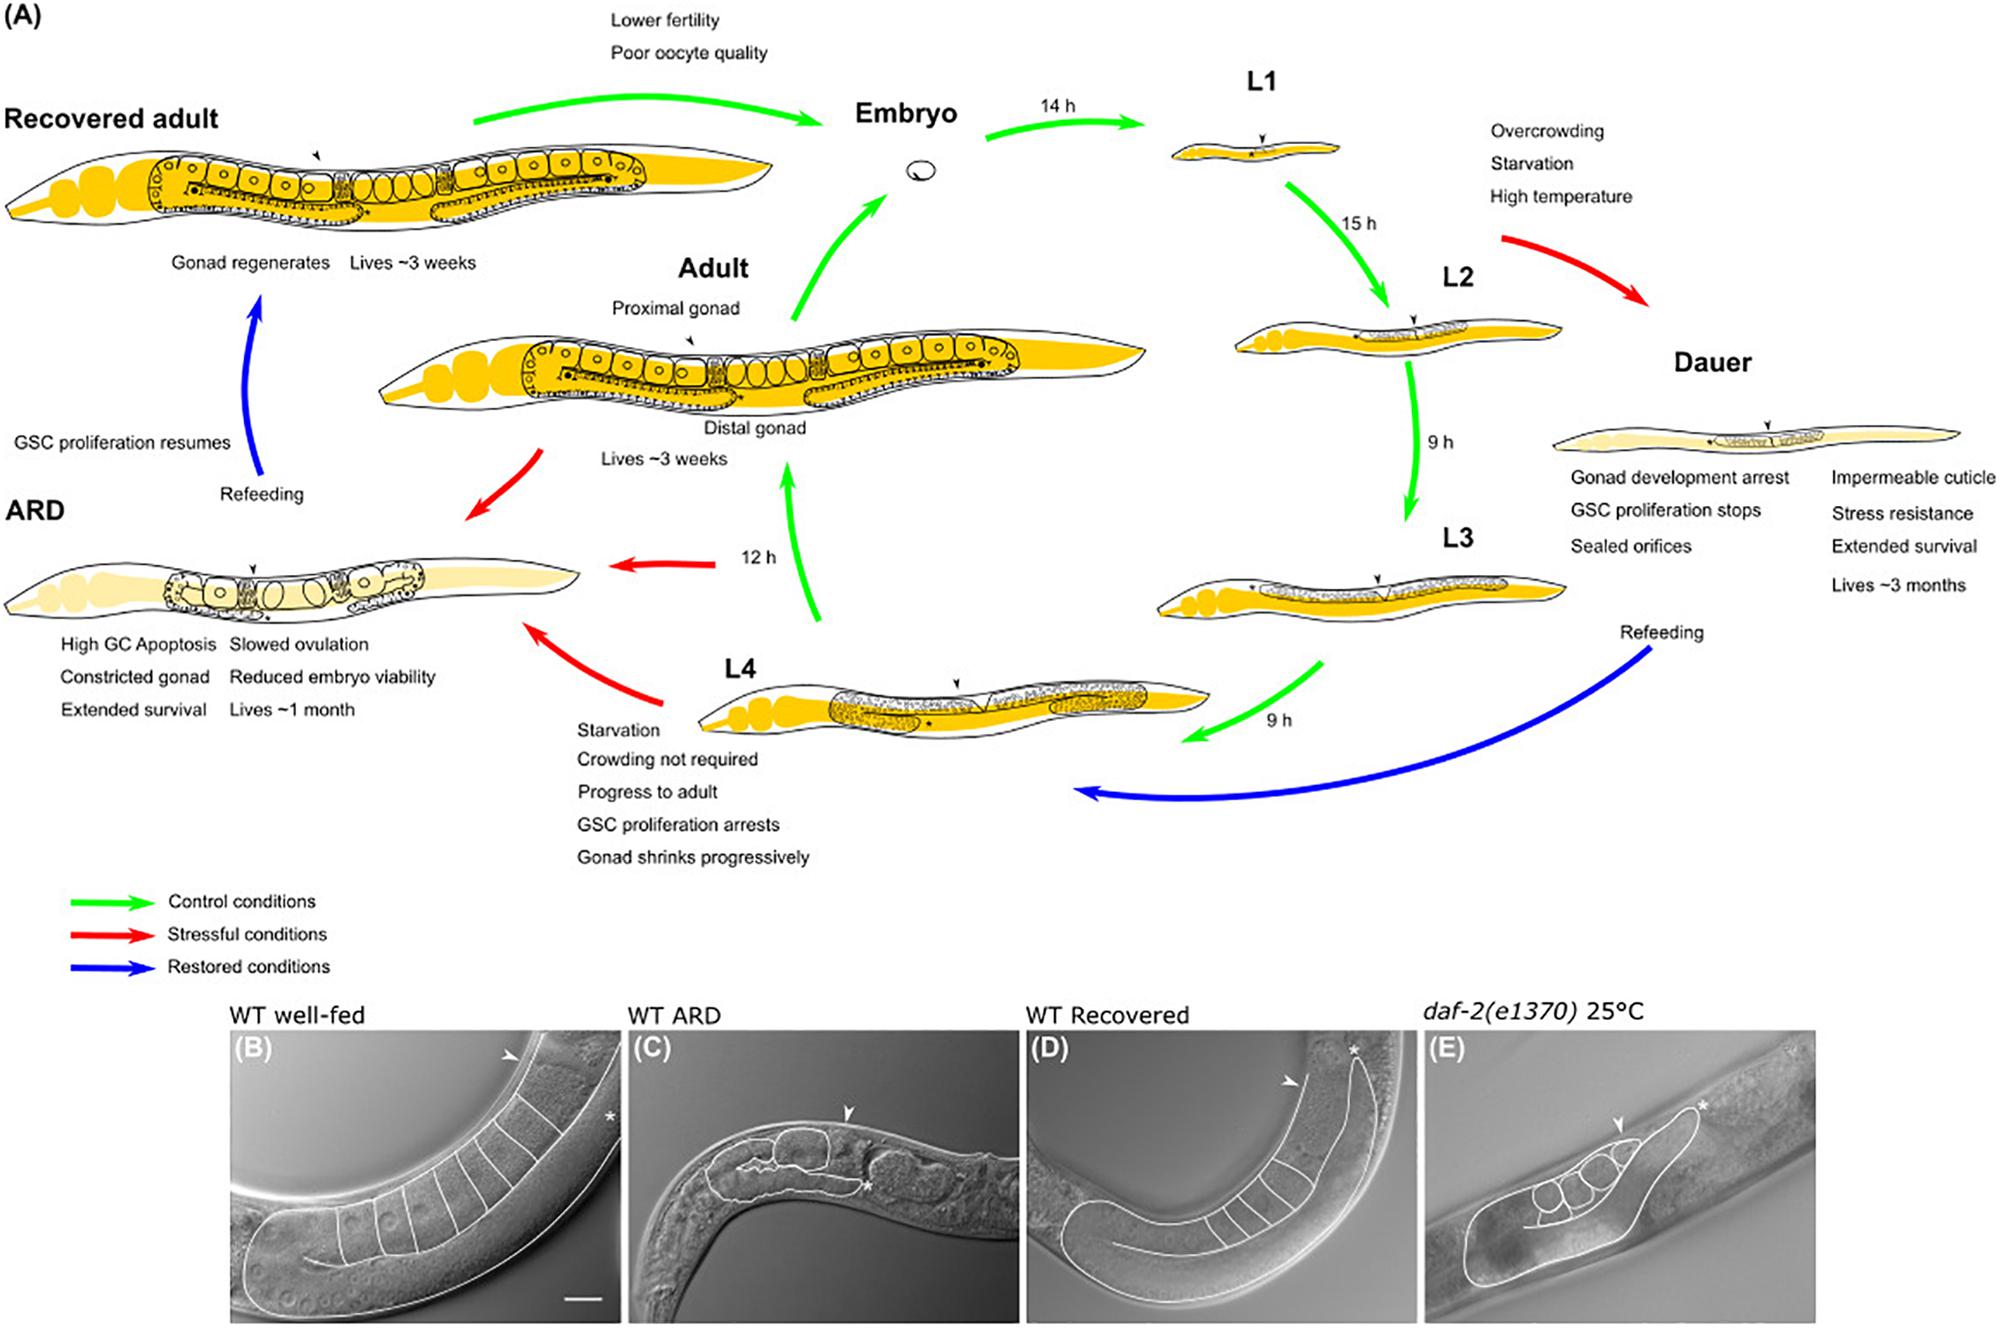 Frontiers | Insights Into the Hypometabolic Stage Caused by Prolonged  Starvation in L4-Adult Caenorhabditis elegans Hermaphrodites